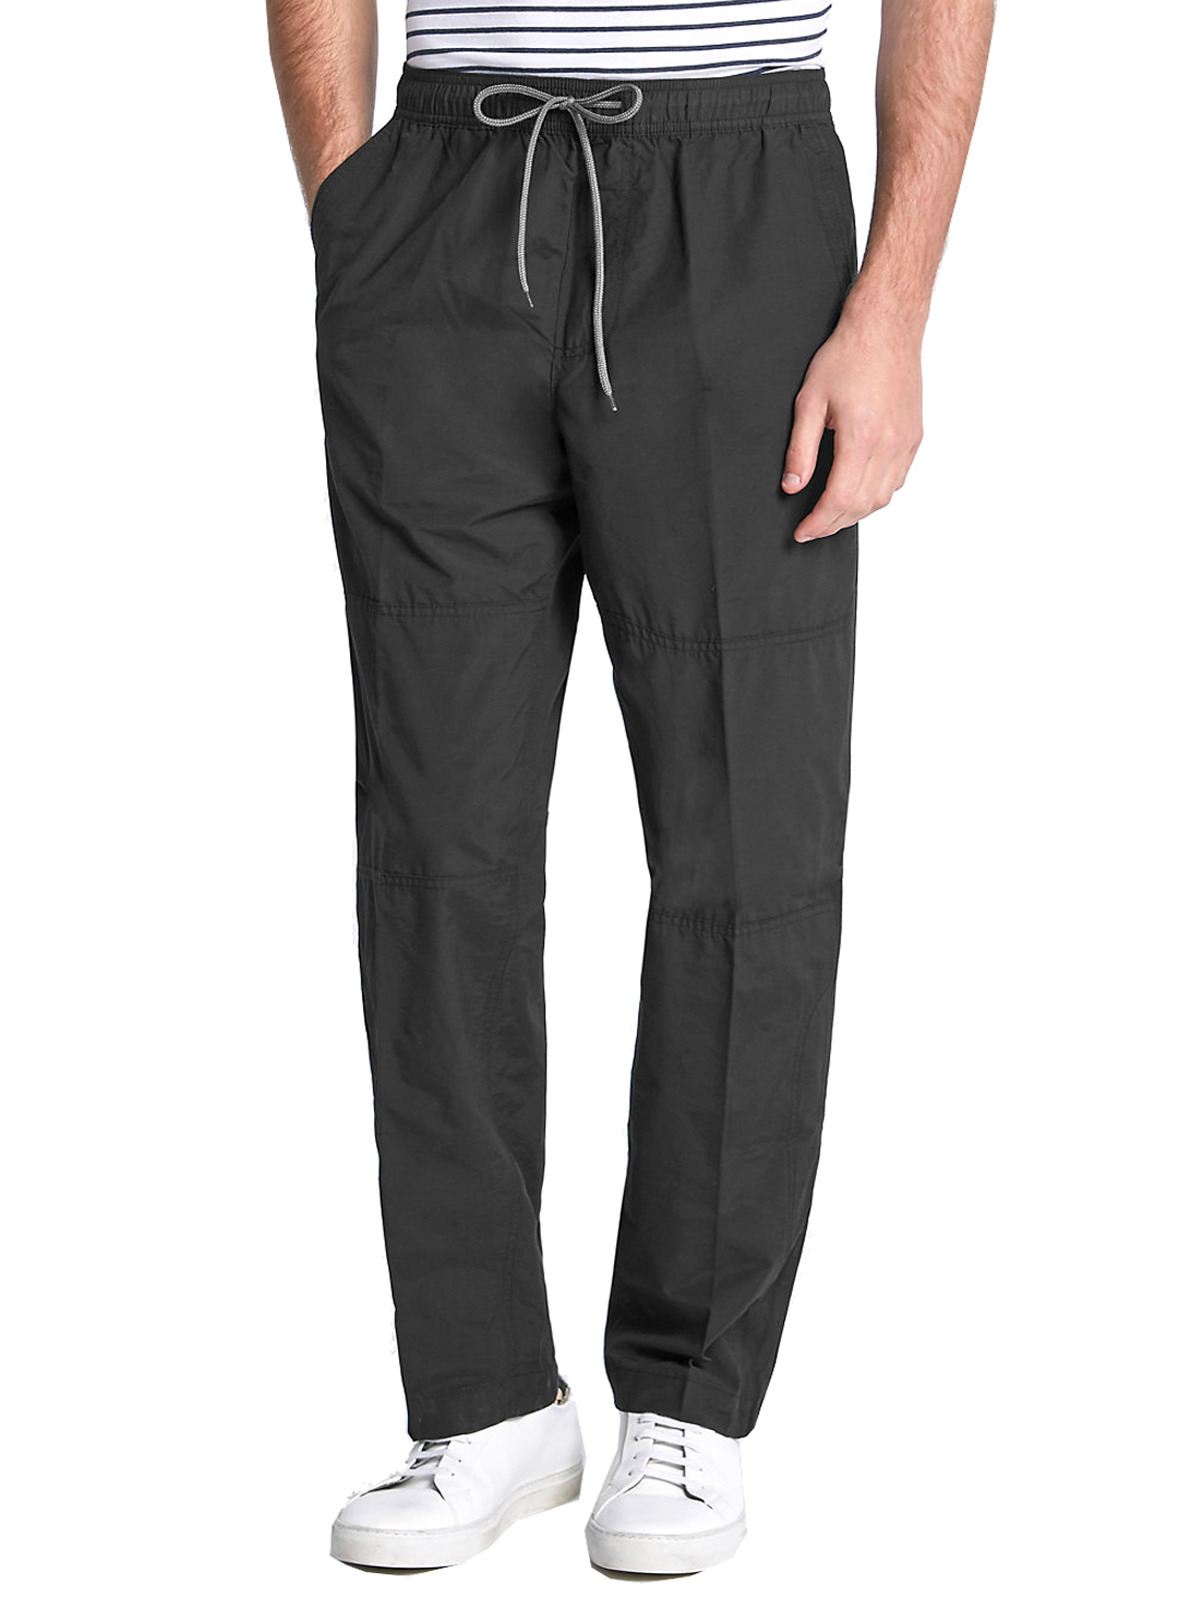 Marks and Spencer - - M&5 PETROL Cotton Rich Pull On Trousers - Waist ...